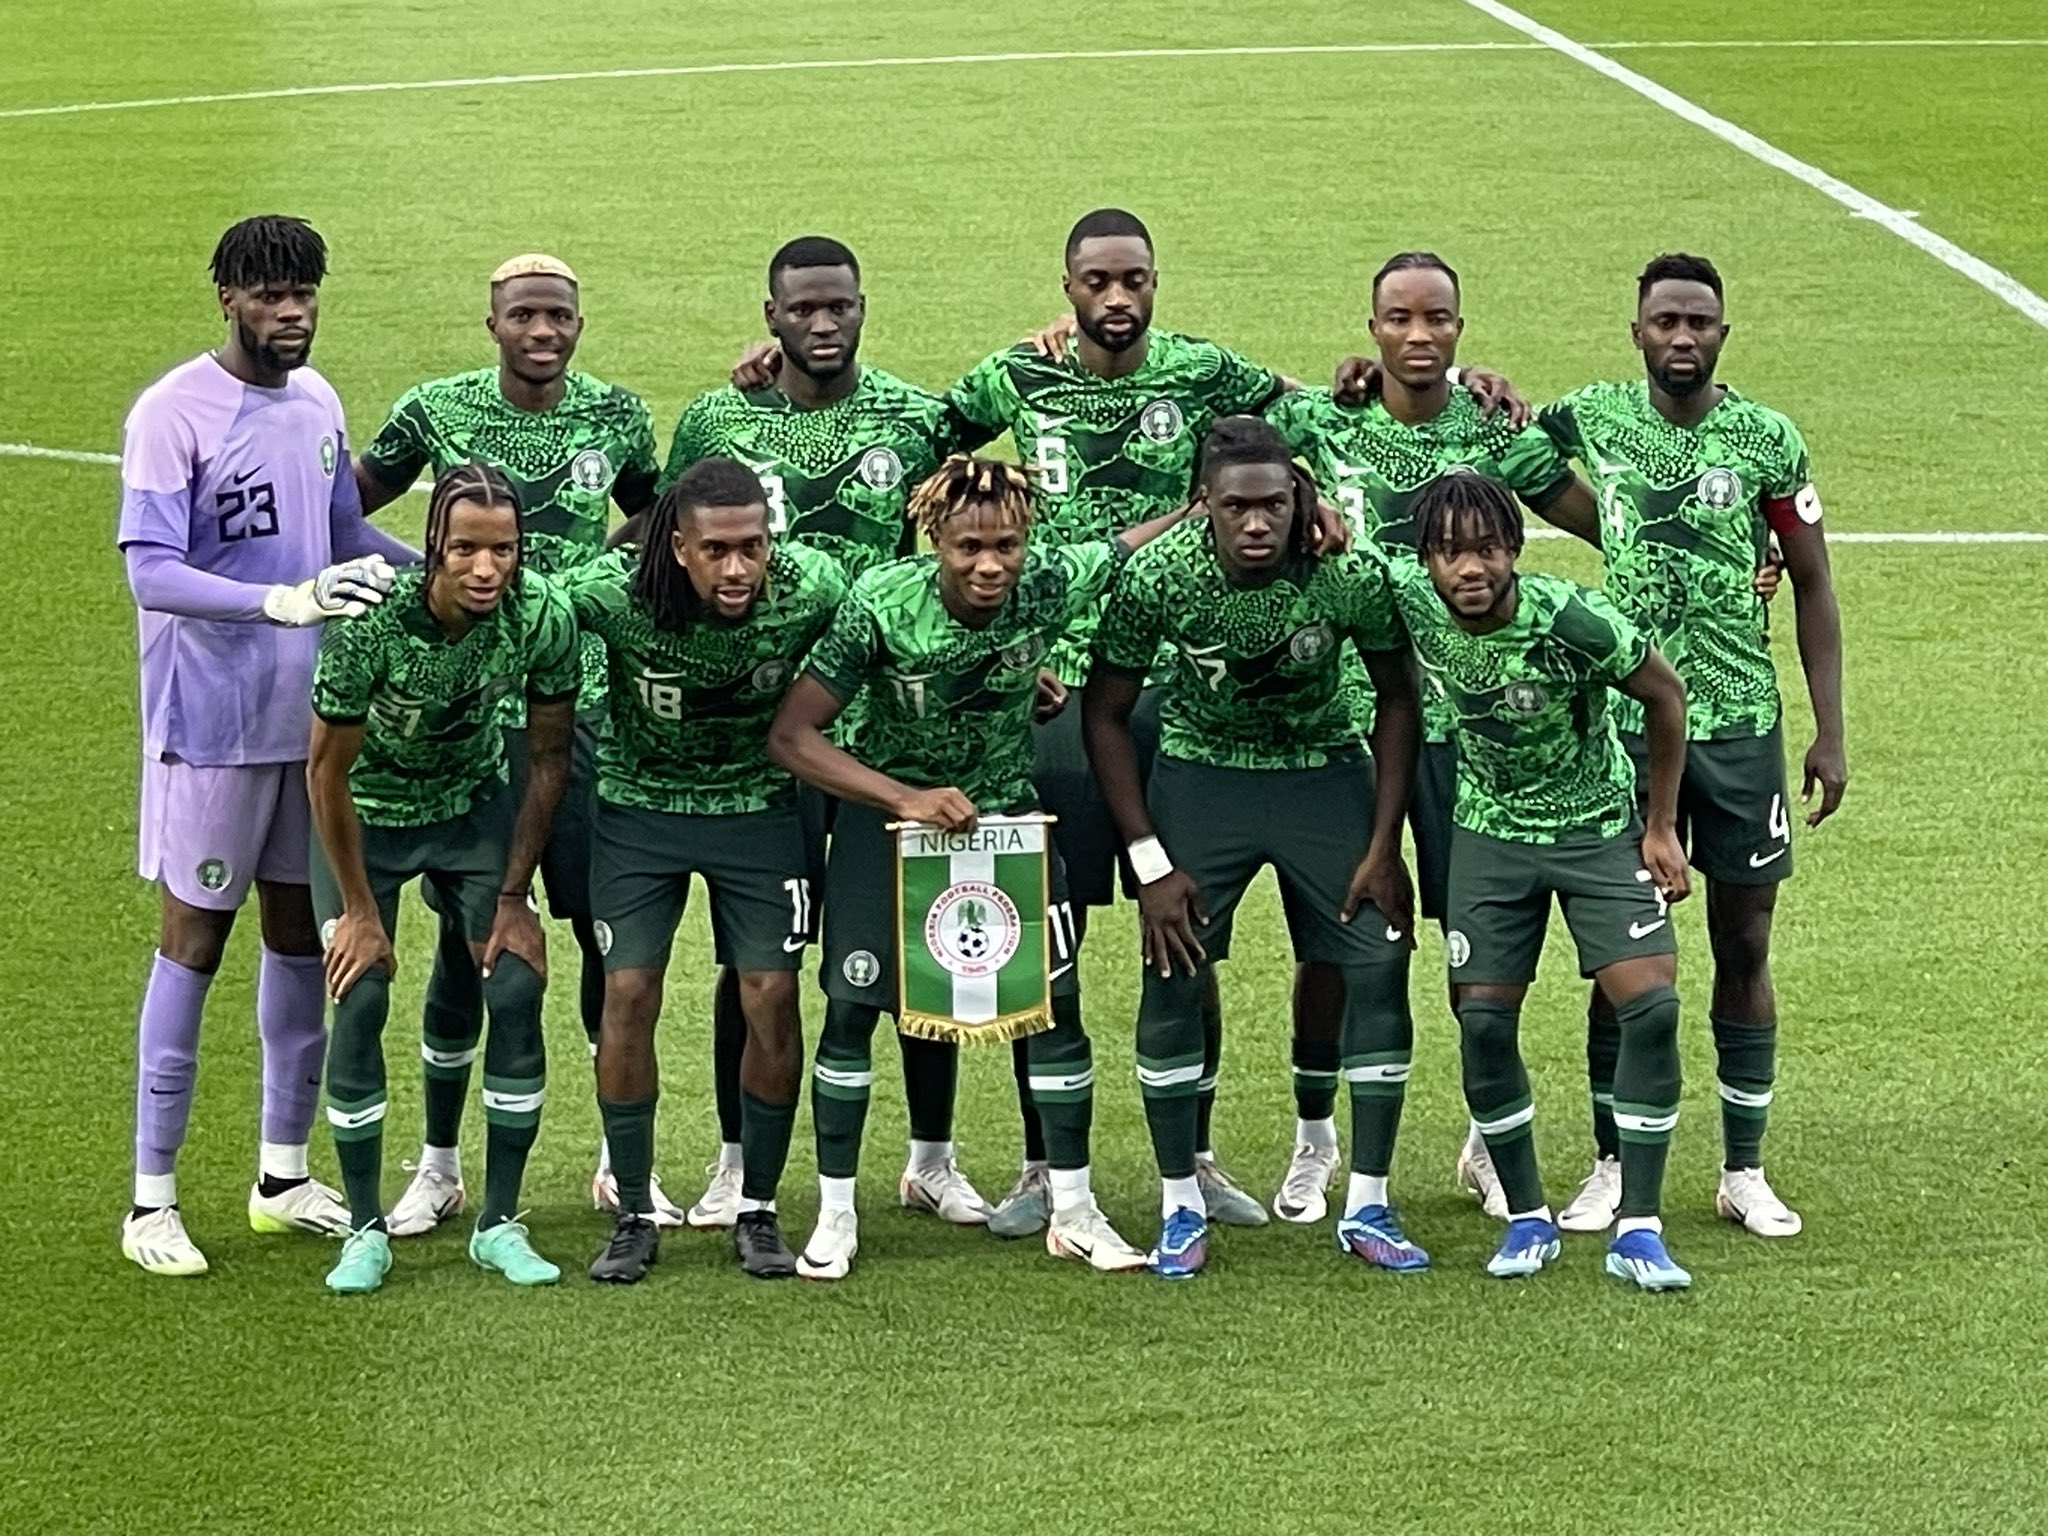 2026 World Cup Race: Super Eagles to arrive to Rwanda on Saturday morning